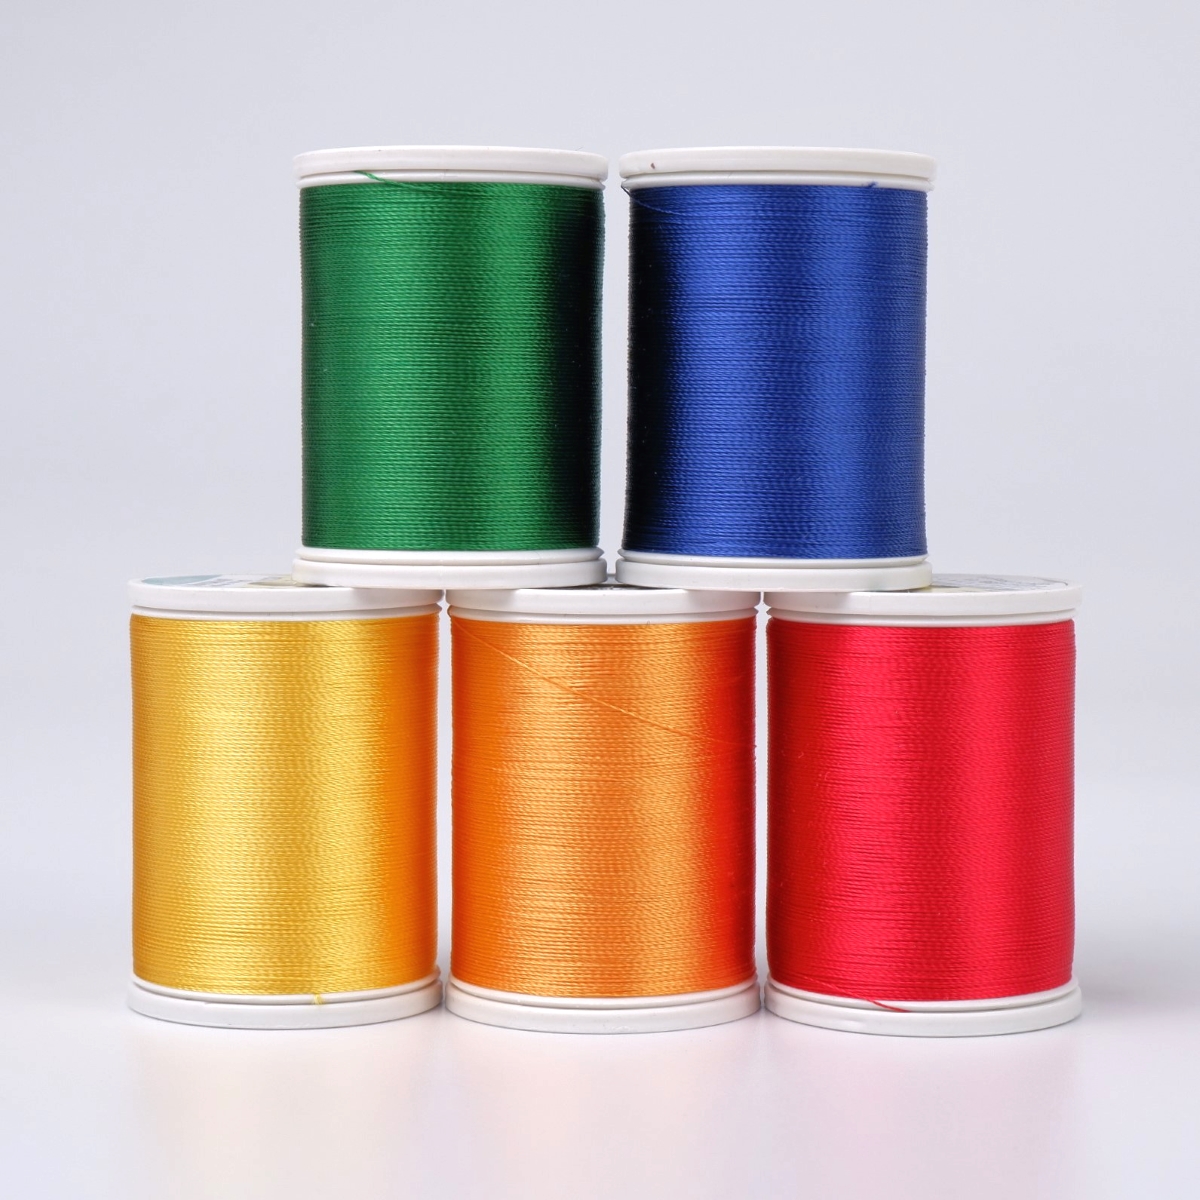 SULKY RAYON 40 - TOYS (5x 780m King
Spools)